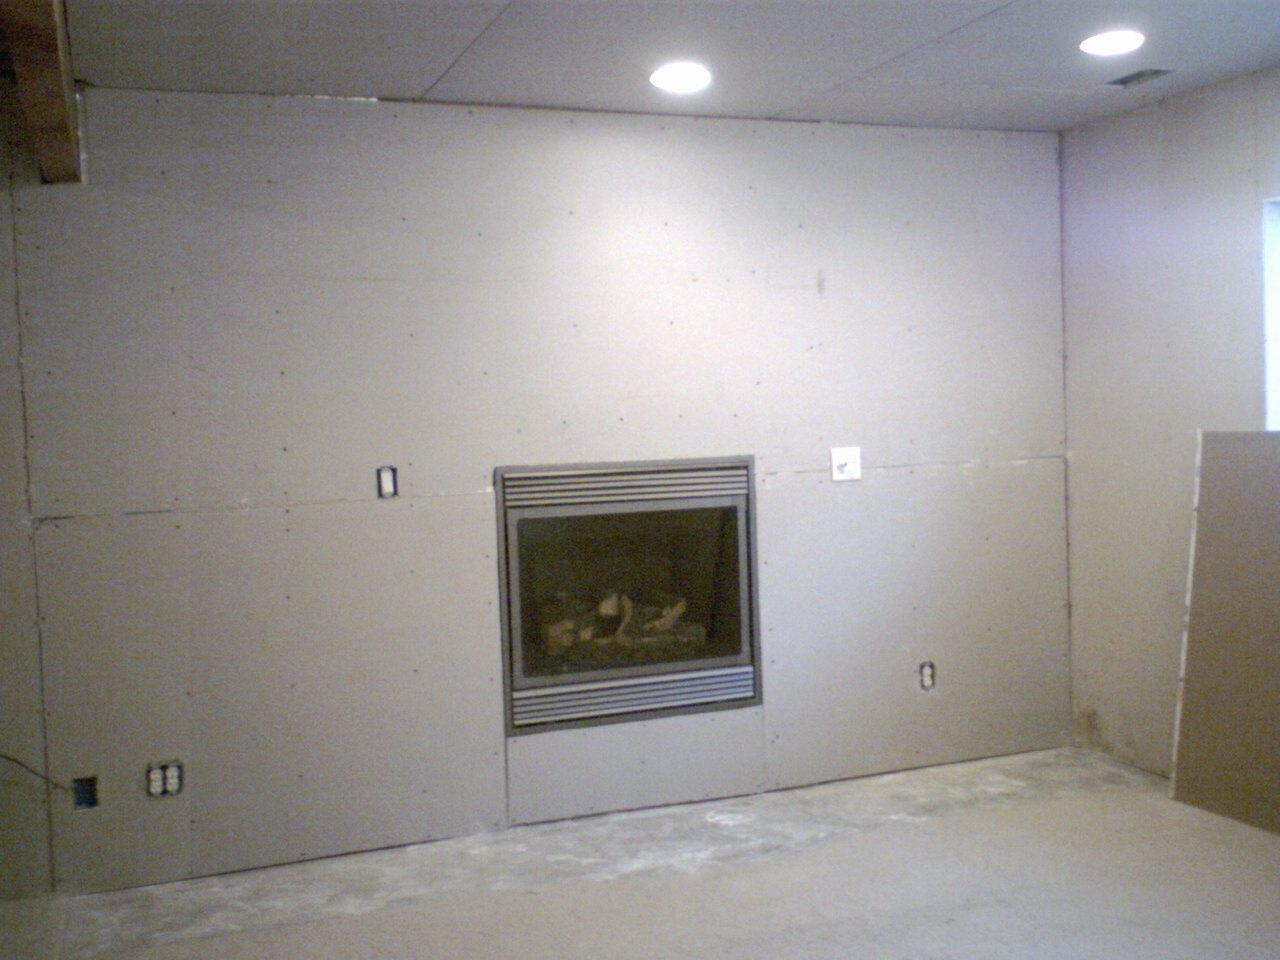 Tile On Drywall Ceilingissues with installing tiles around a fireplace tiling floor